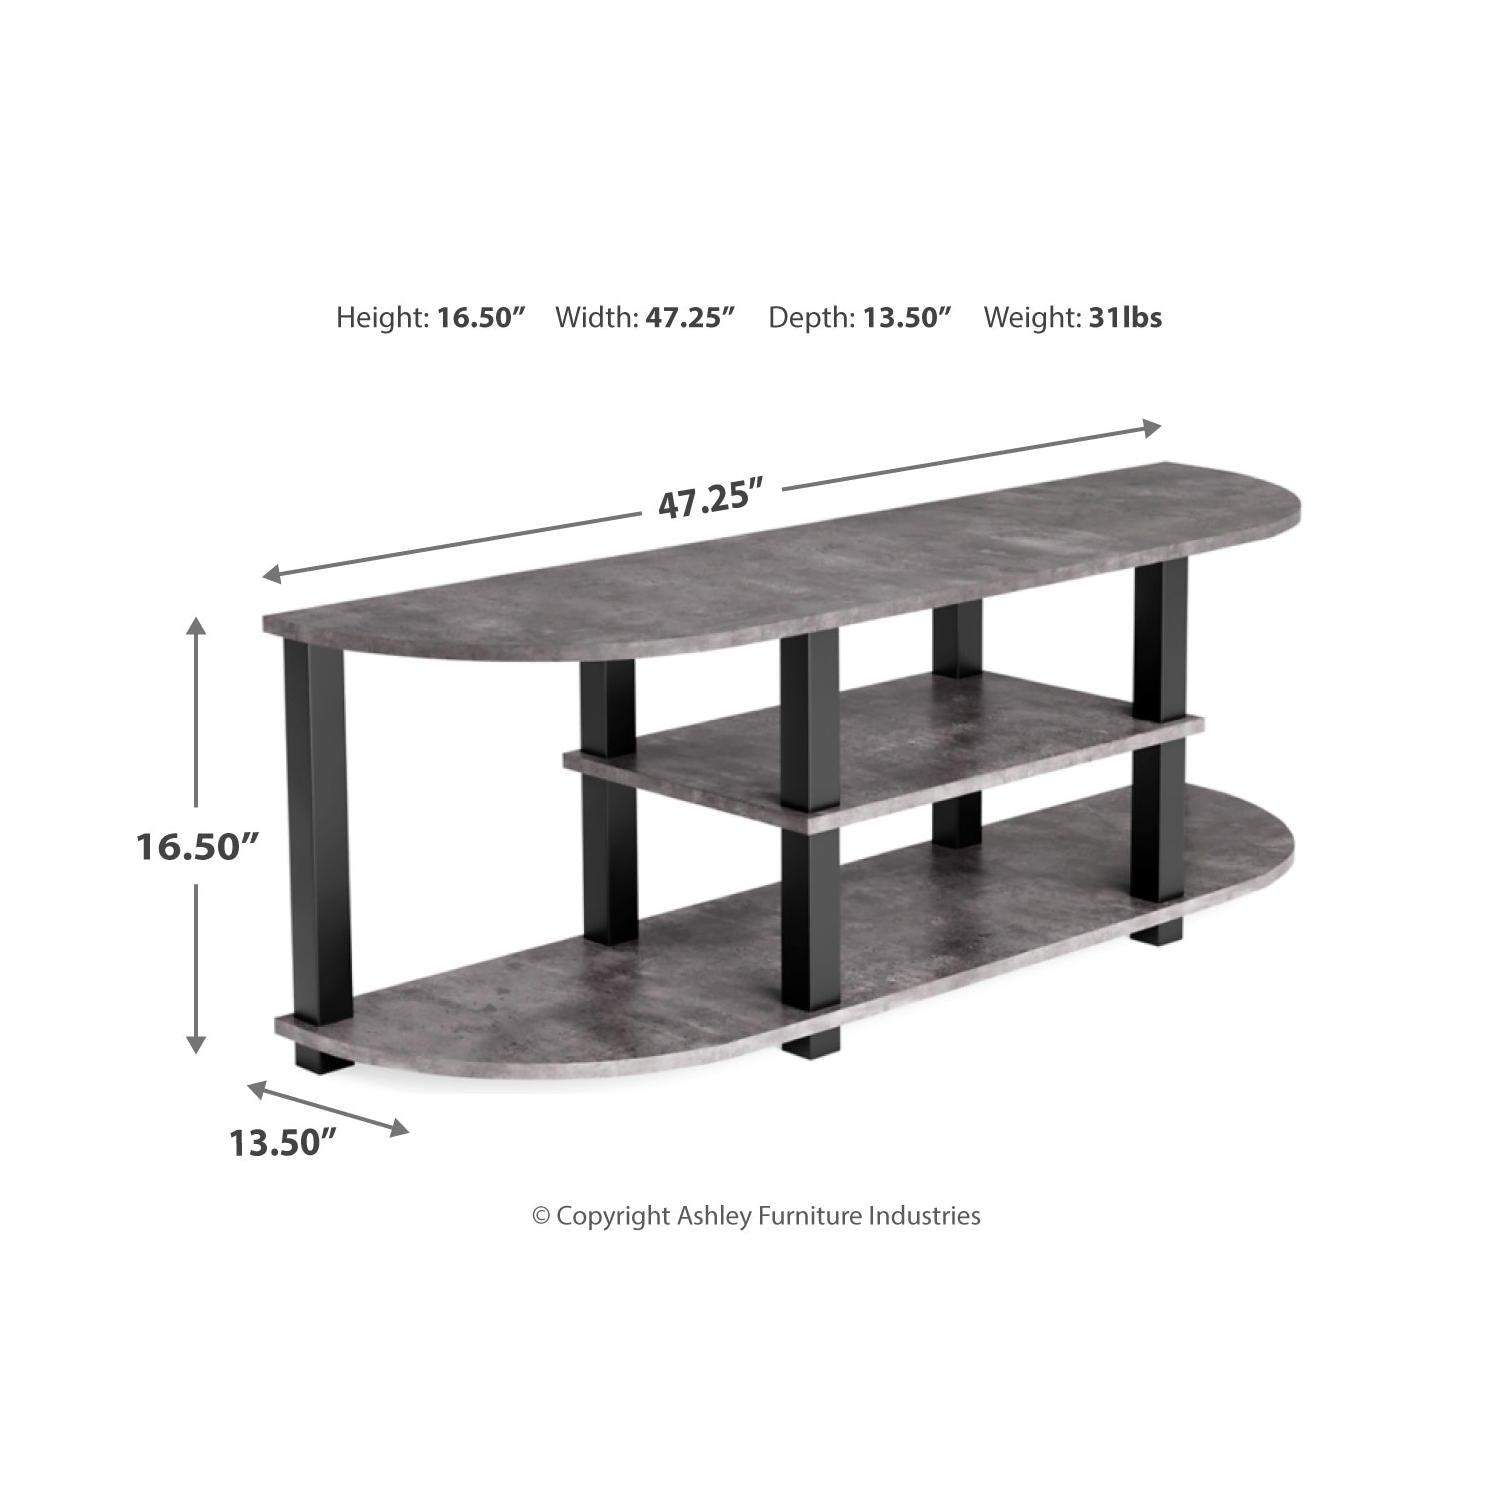 Jastyne TV Stand - Two-tone